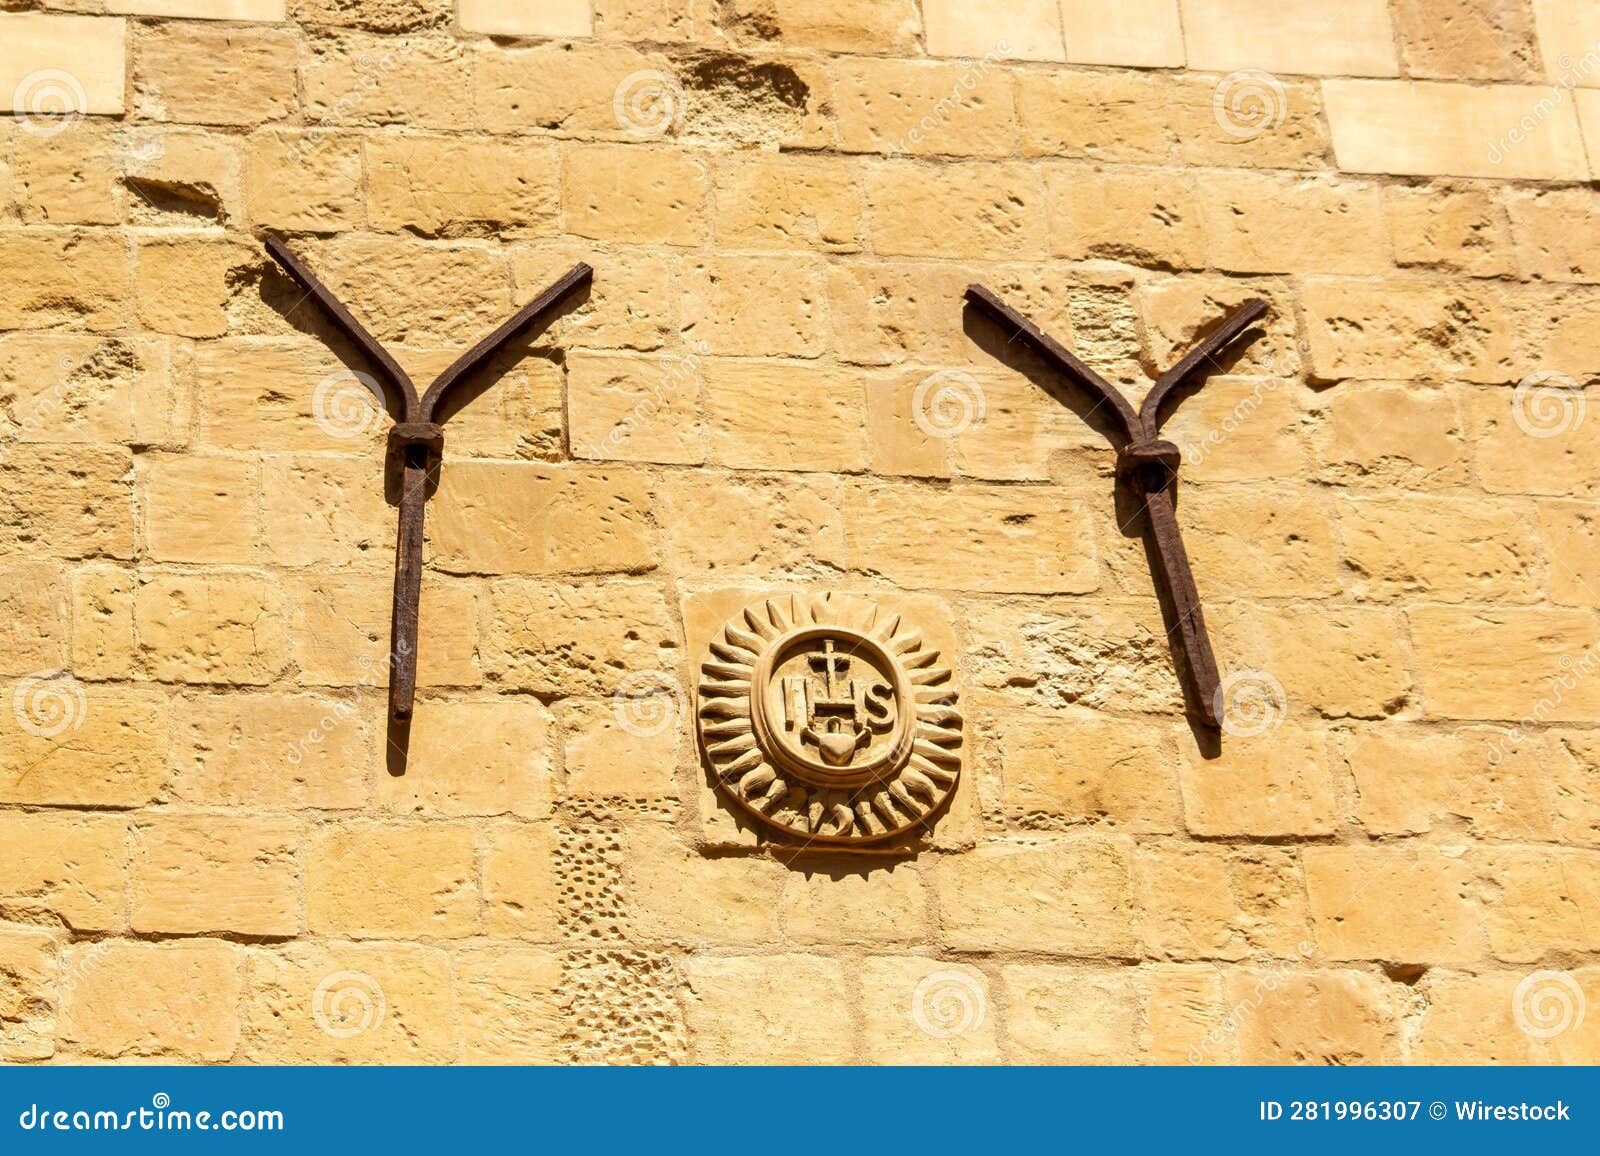 ihs stone emblem and two iron y s decorating the back of the jesuits church. valletta, malta.